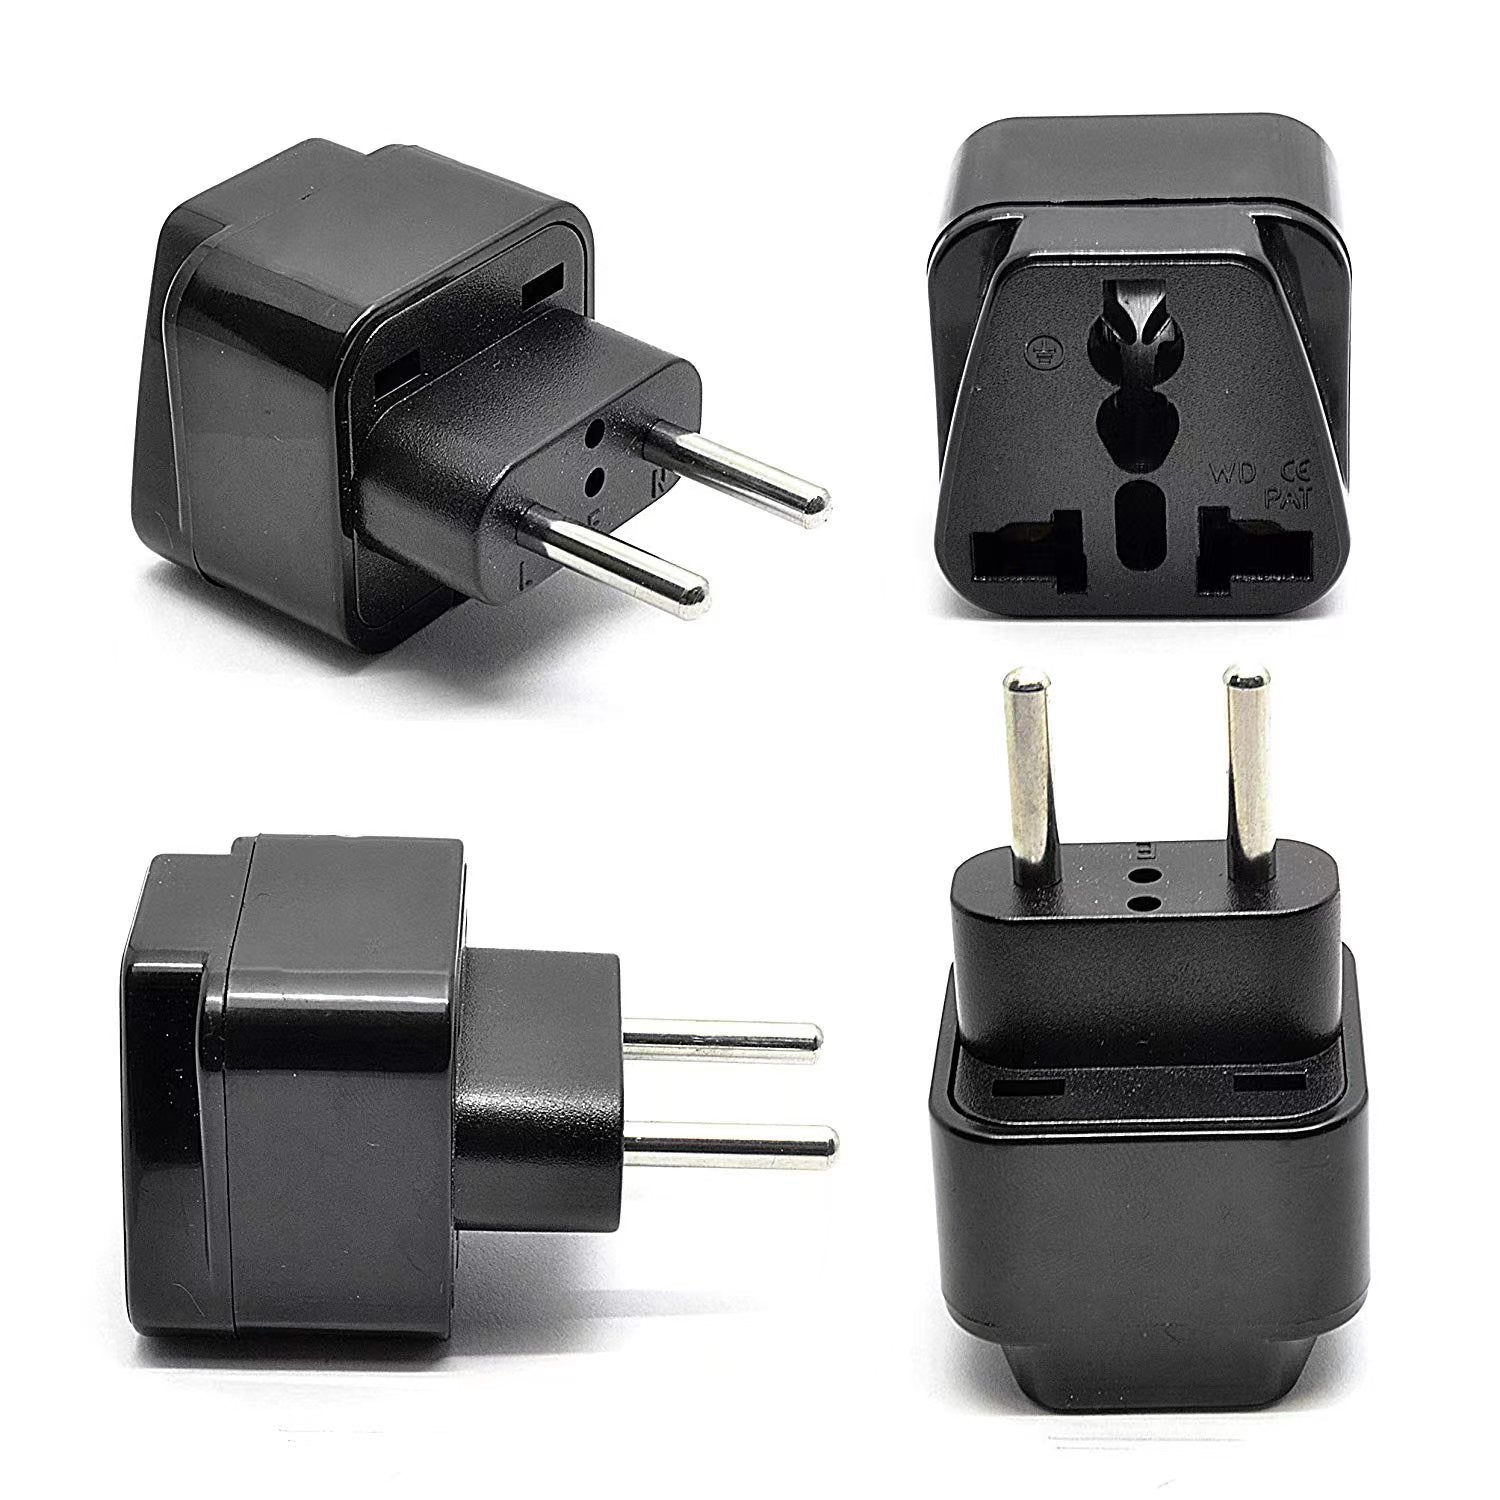 US to EU/UK/AU Charger Switch Adapter for Travel - AOHi